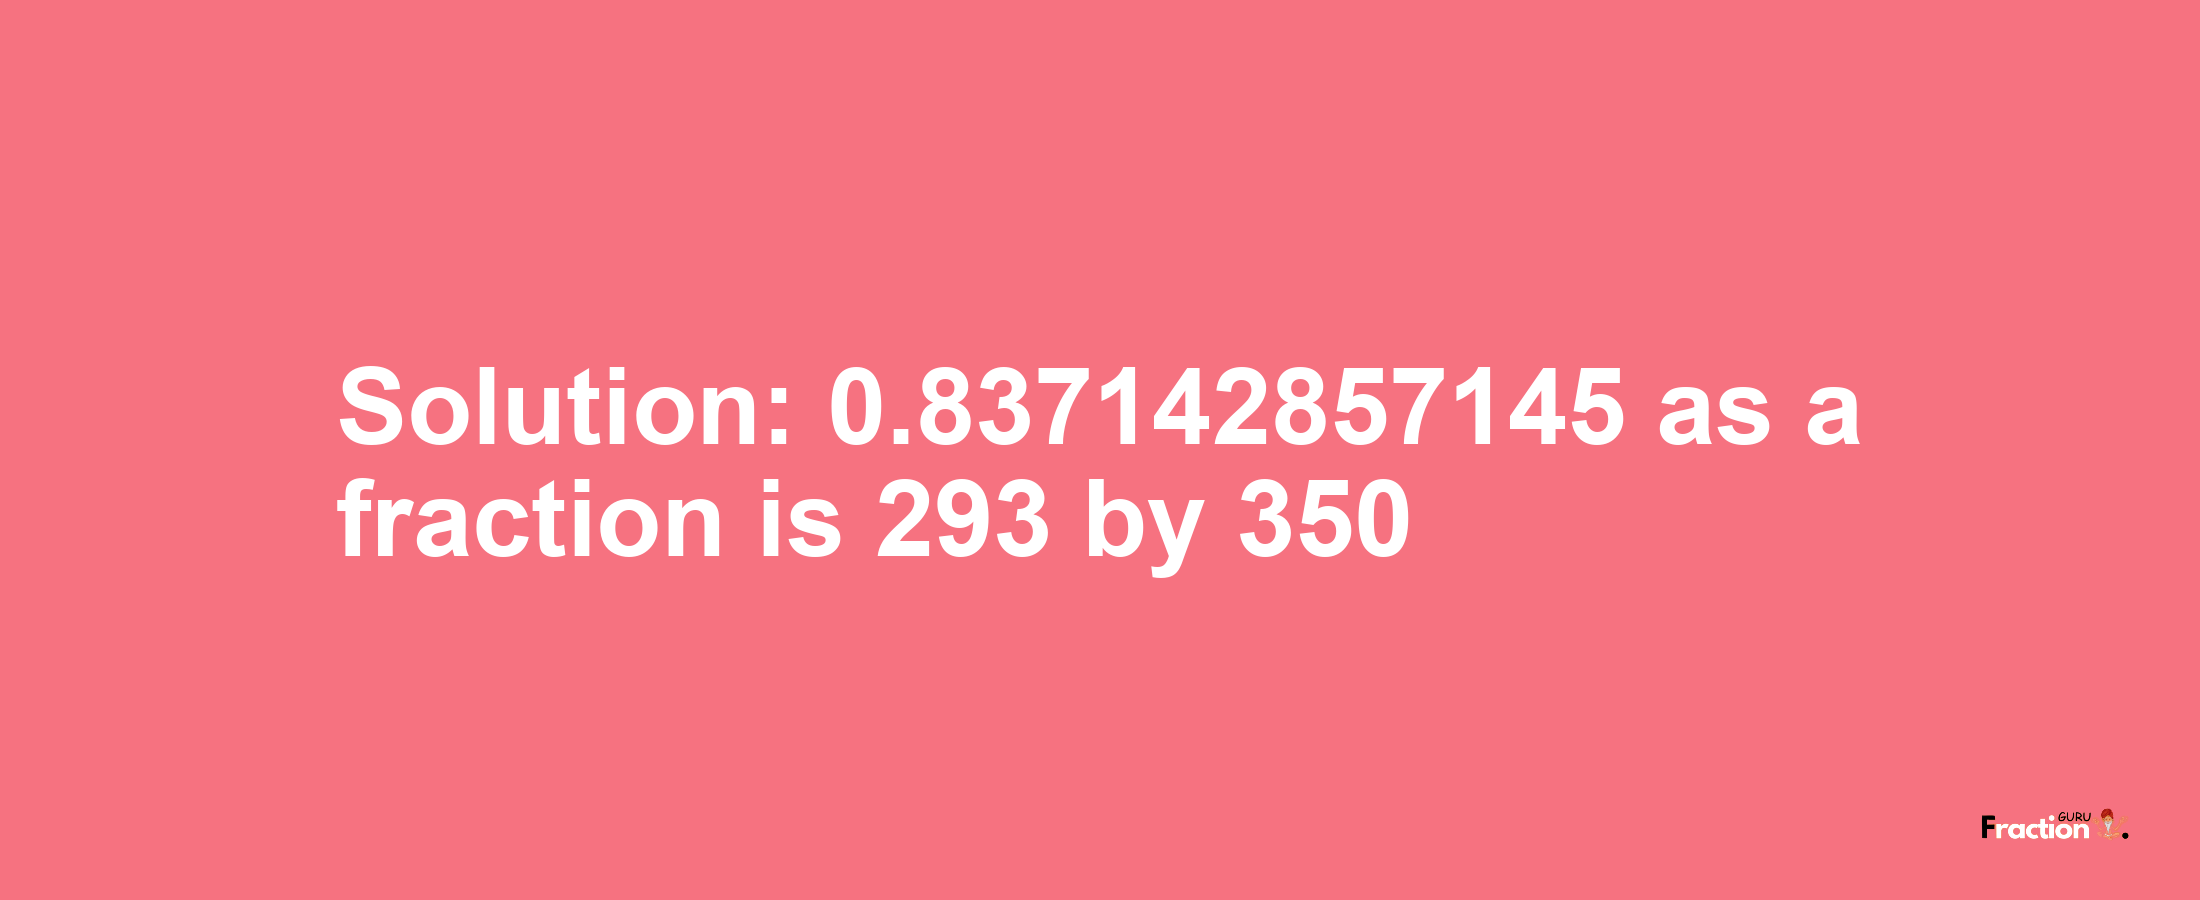 Solution:0.837142857145 as a fraction is 293/350